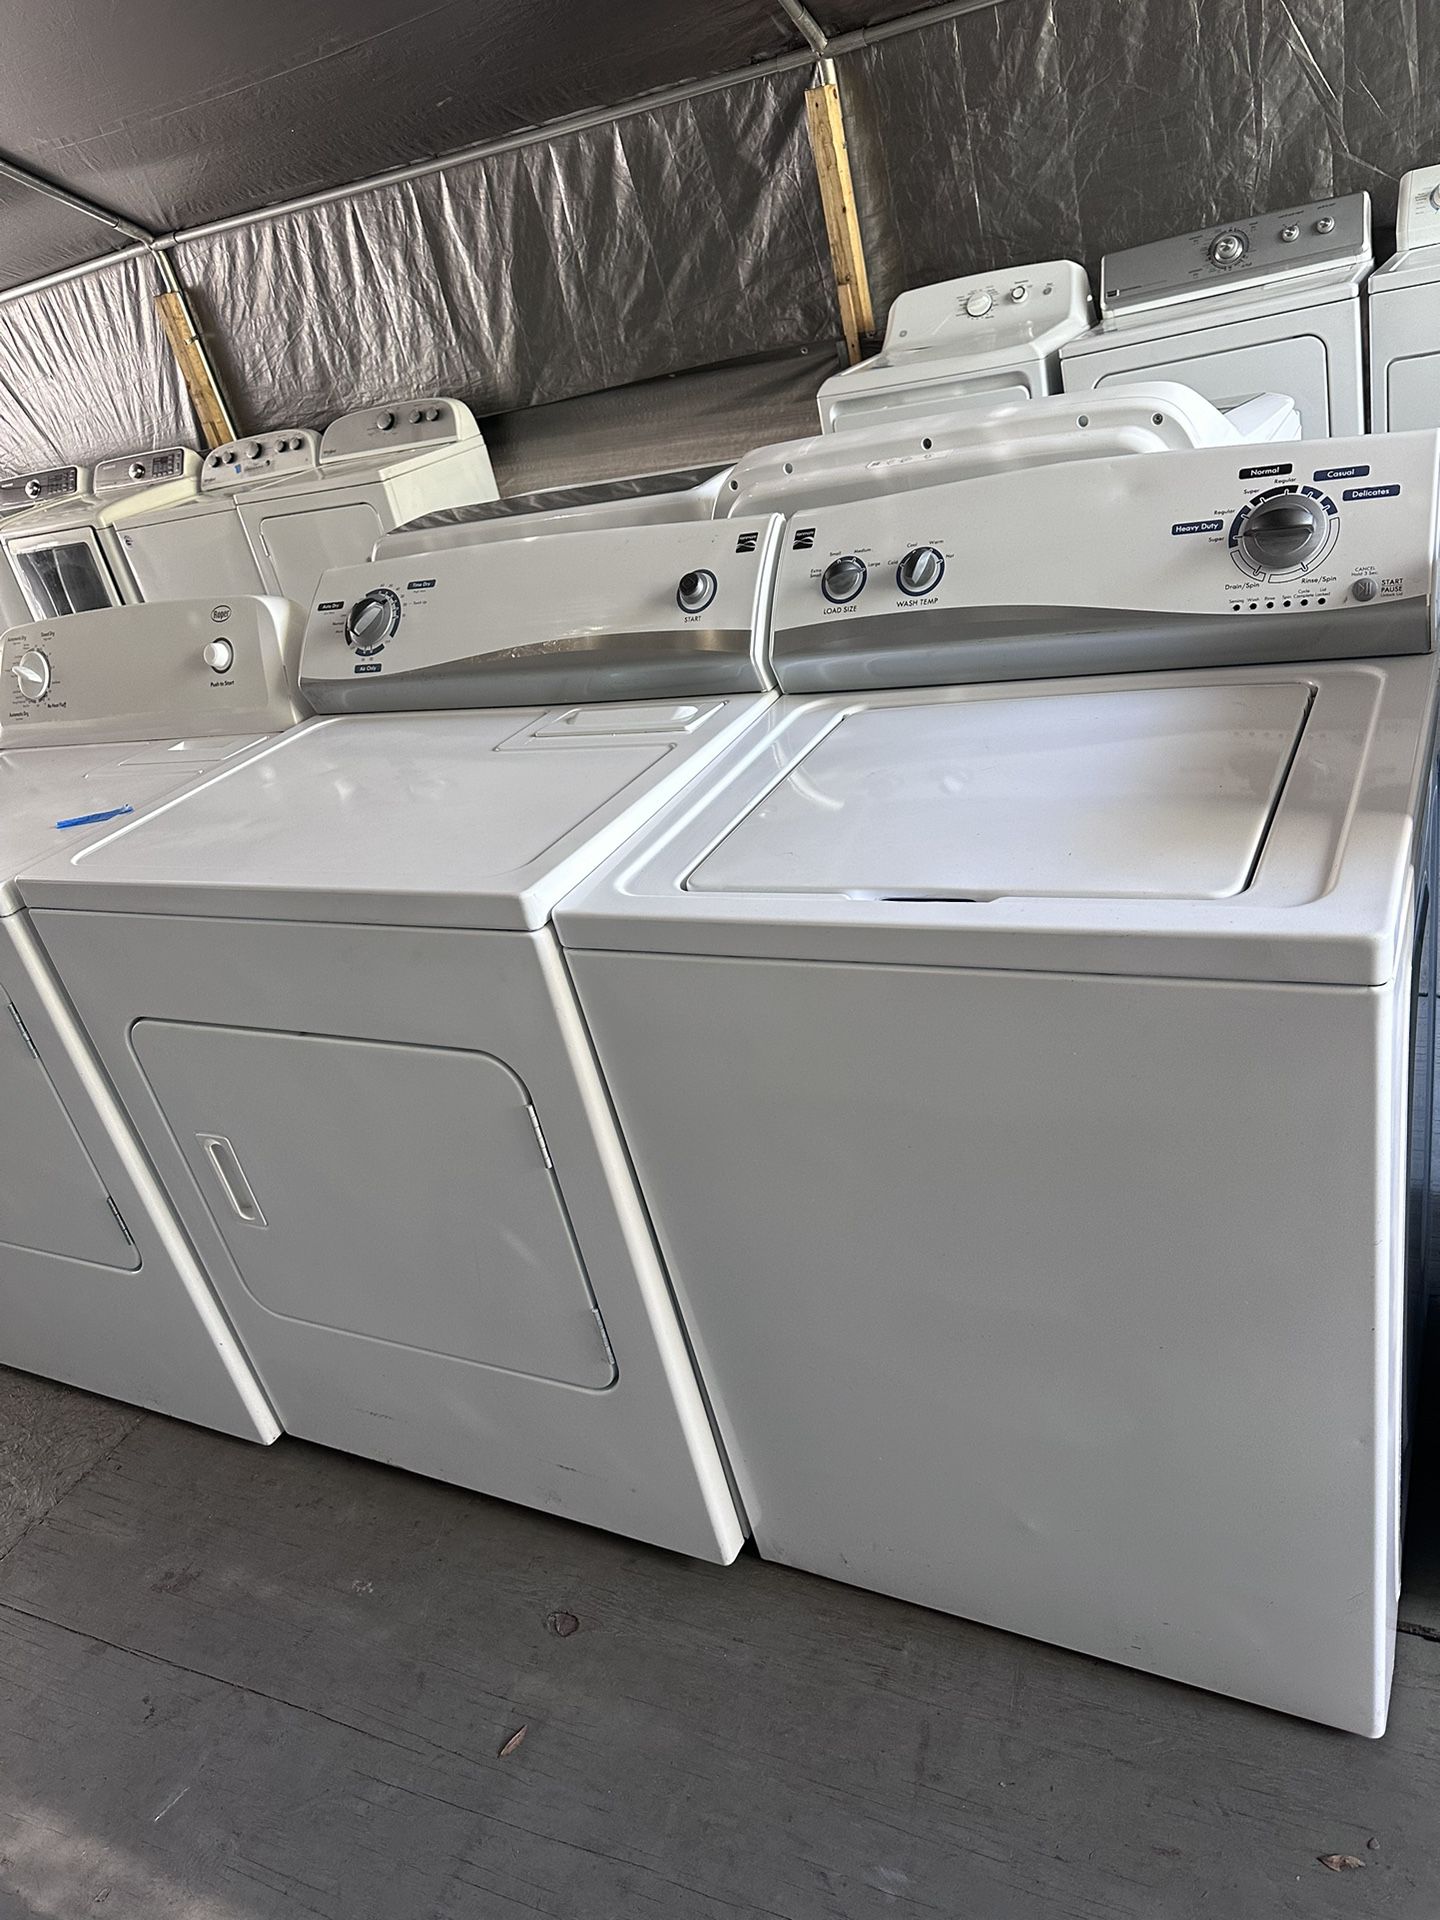 Kenmore Washer And Dryer Everything Work Great 60 Day Warranty 📍5413 U.s 92 Plant City Fl